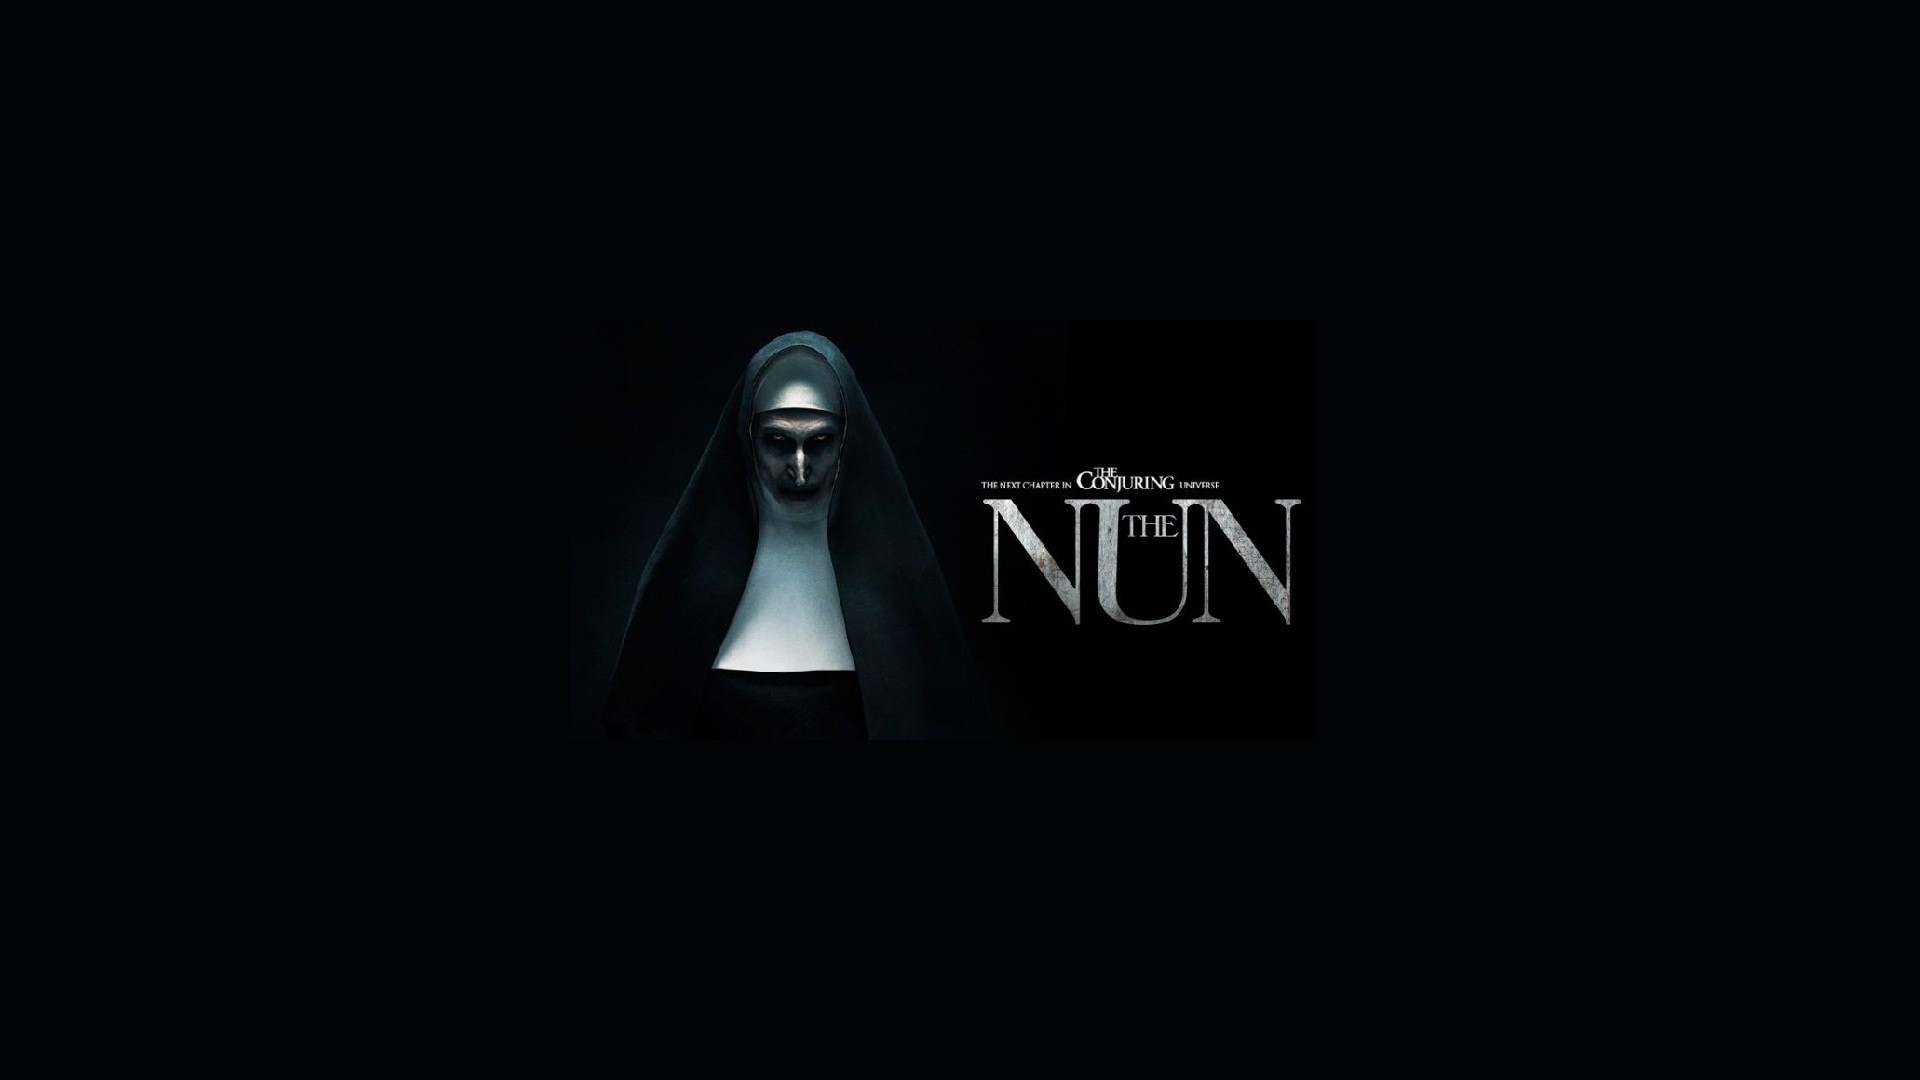 The Nun HD Wallpaper With Resolution 1920X1080 pixel. You can make this wallpaper for your Desktop Computer Backgrounds, Mac Wallpapers, Android Lock screen or iPhone Screensavers